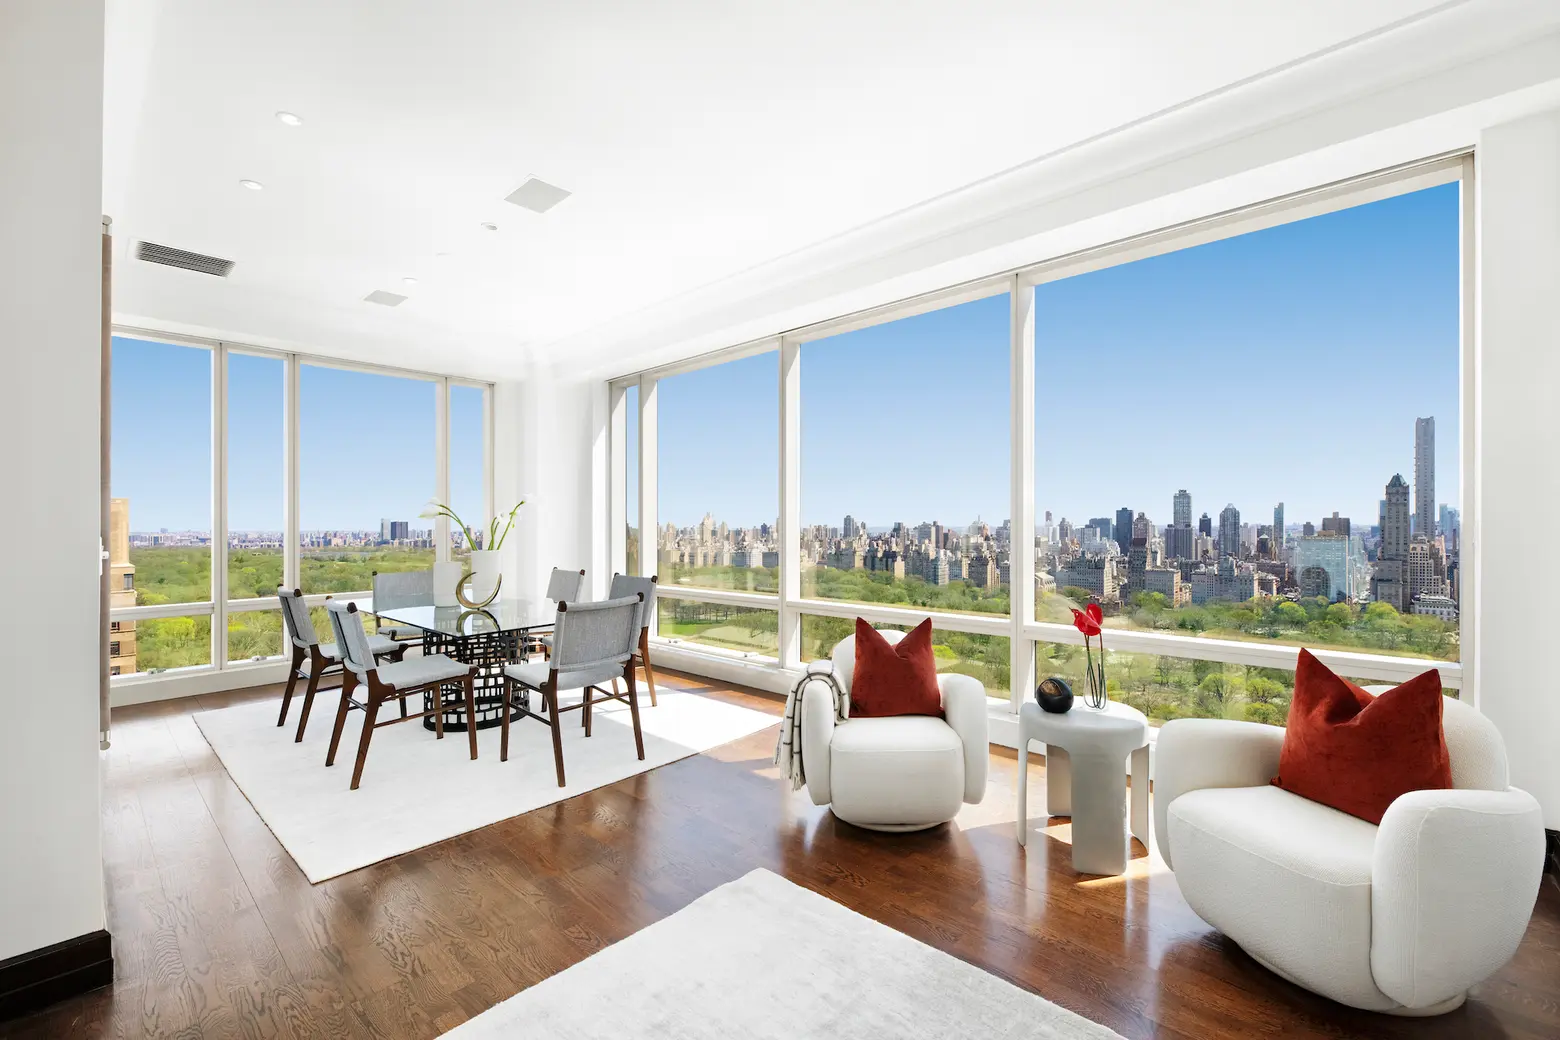 Janet Jackson sells her Central Park West home for $8.8M